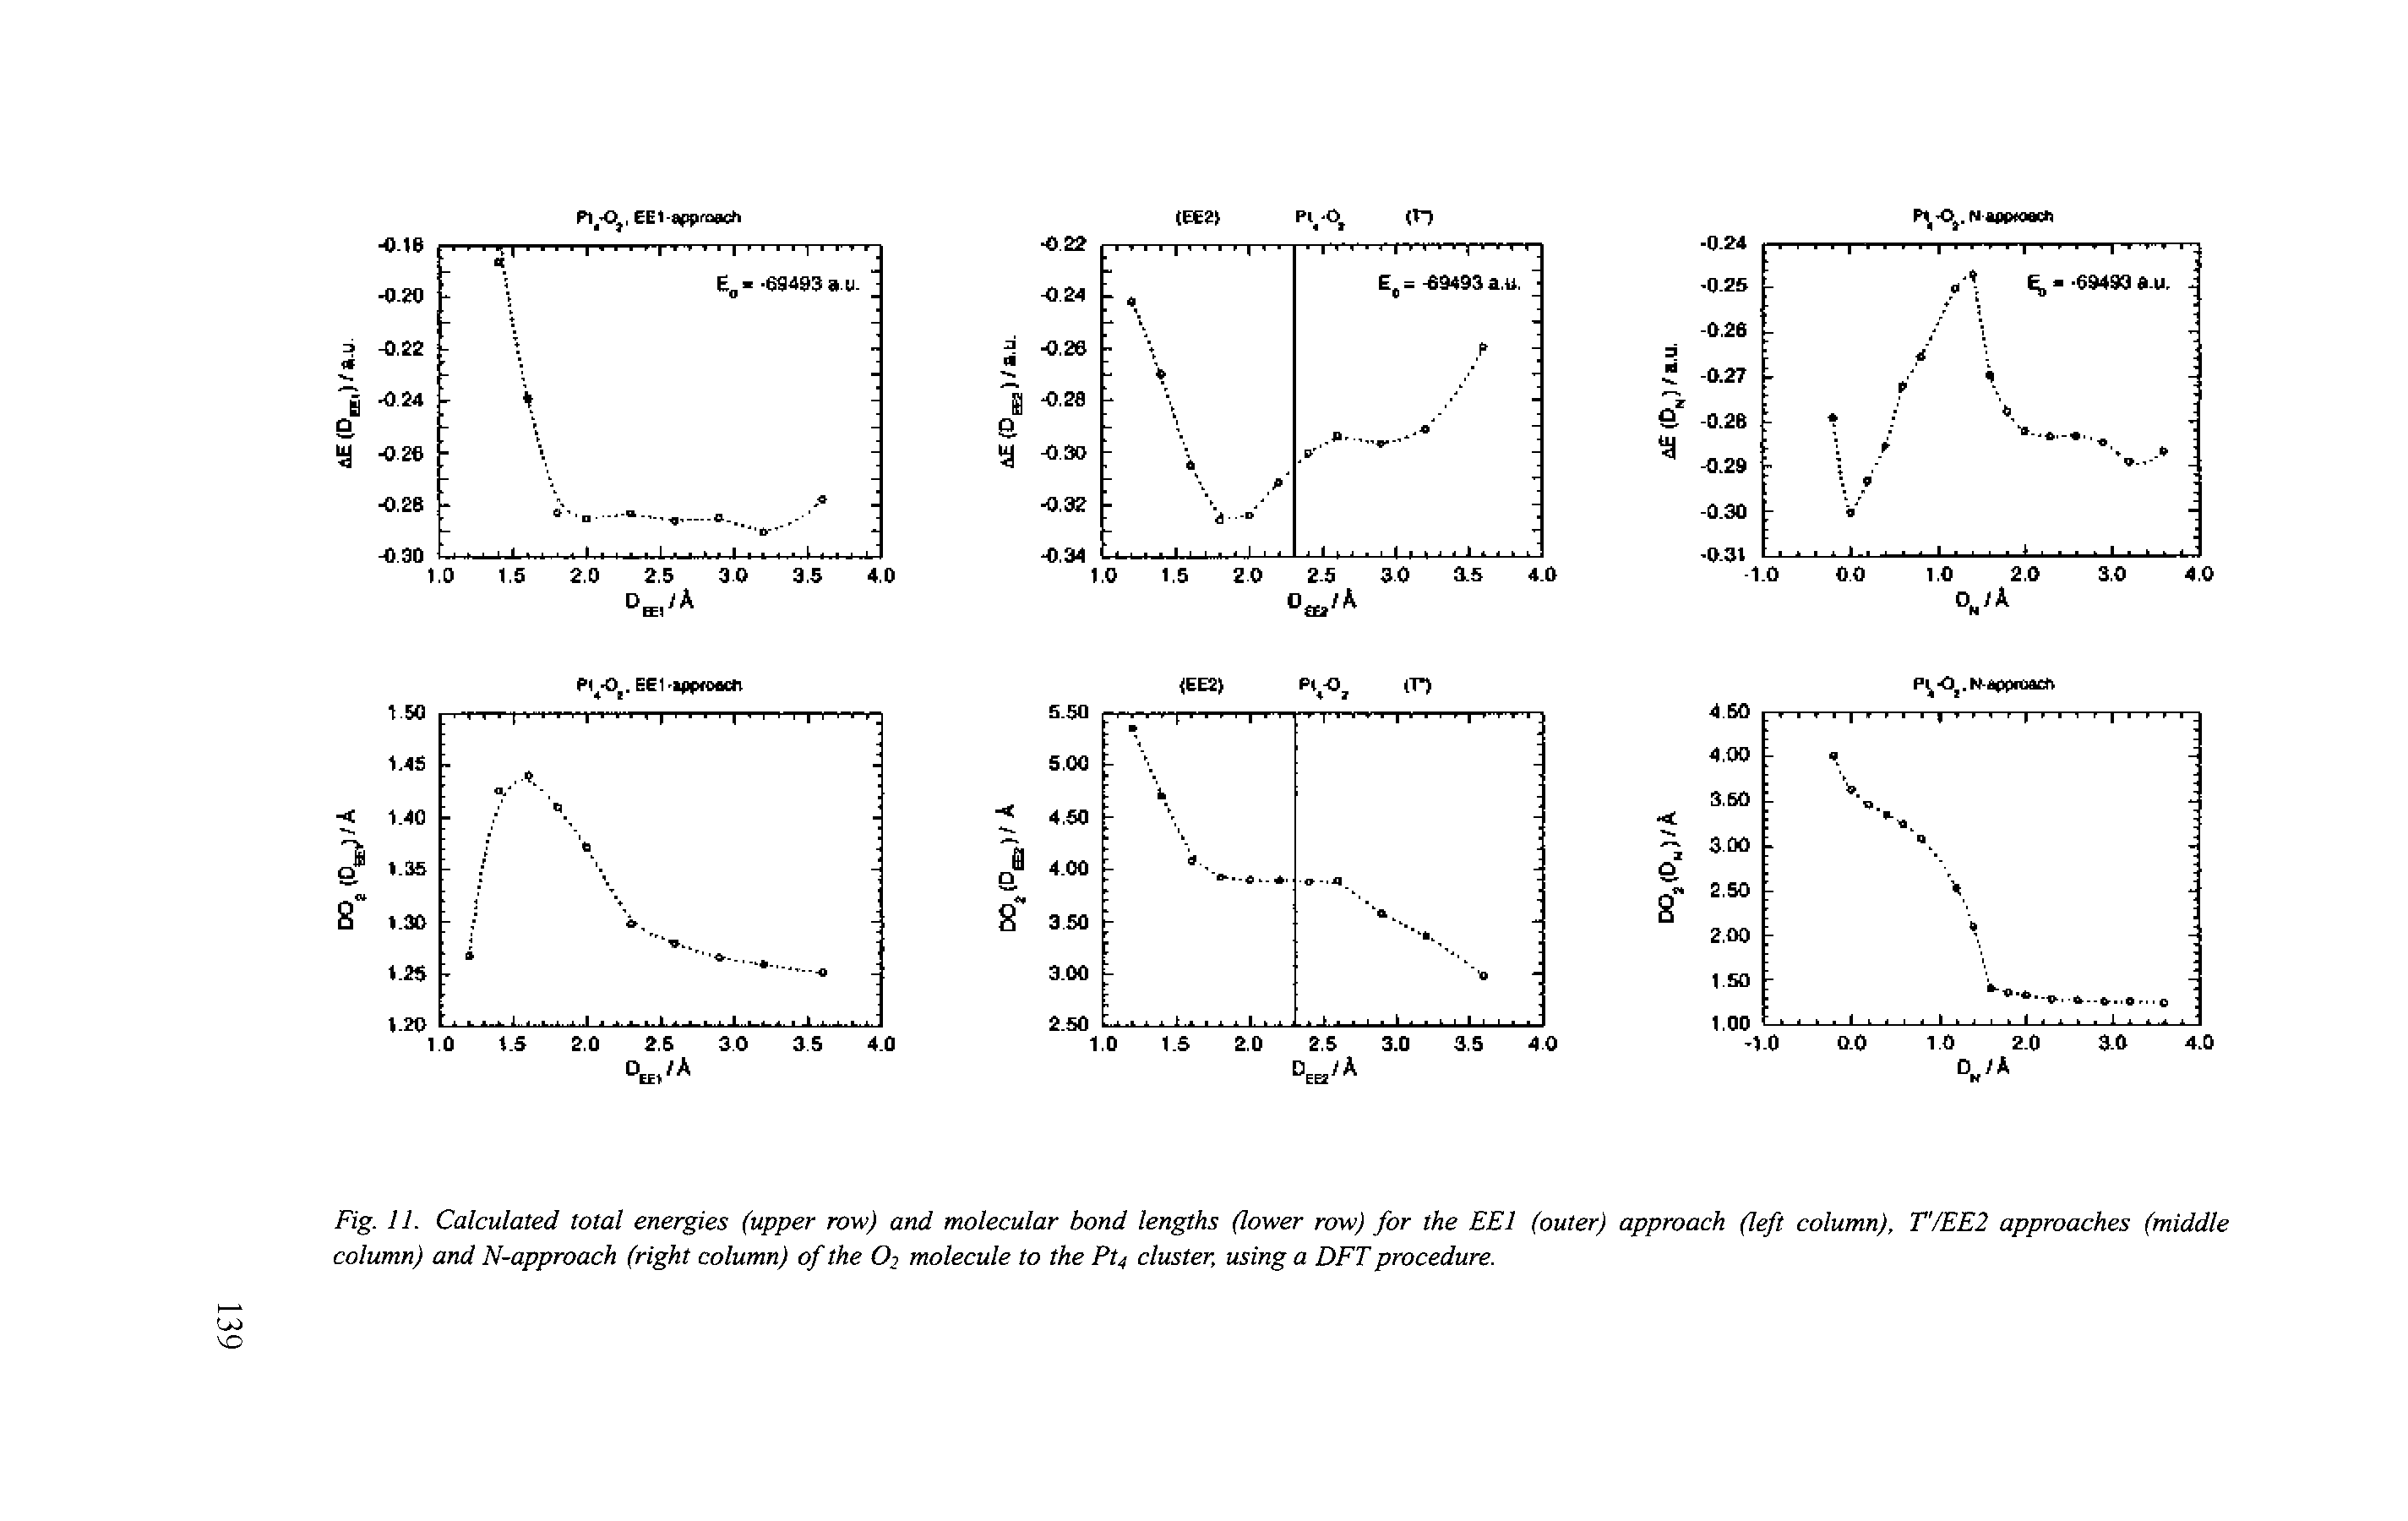 Fig. 11. Calculated total energies (upper row) and molecular bond lengths (lower row) for the EEl (outer) approach (left column), T/EE2 approaches (middle column) and N-approach (right column) of the O2 molecule to the Pt cluster, using a DFT procedure.